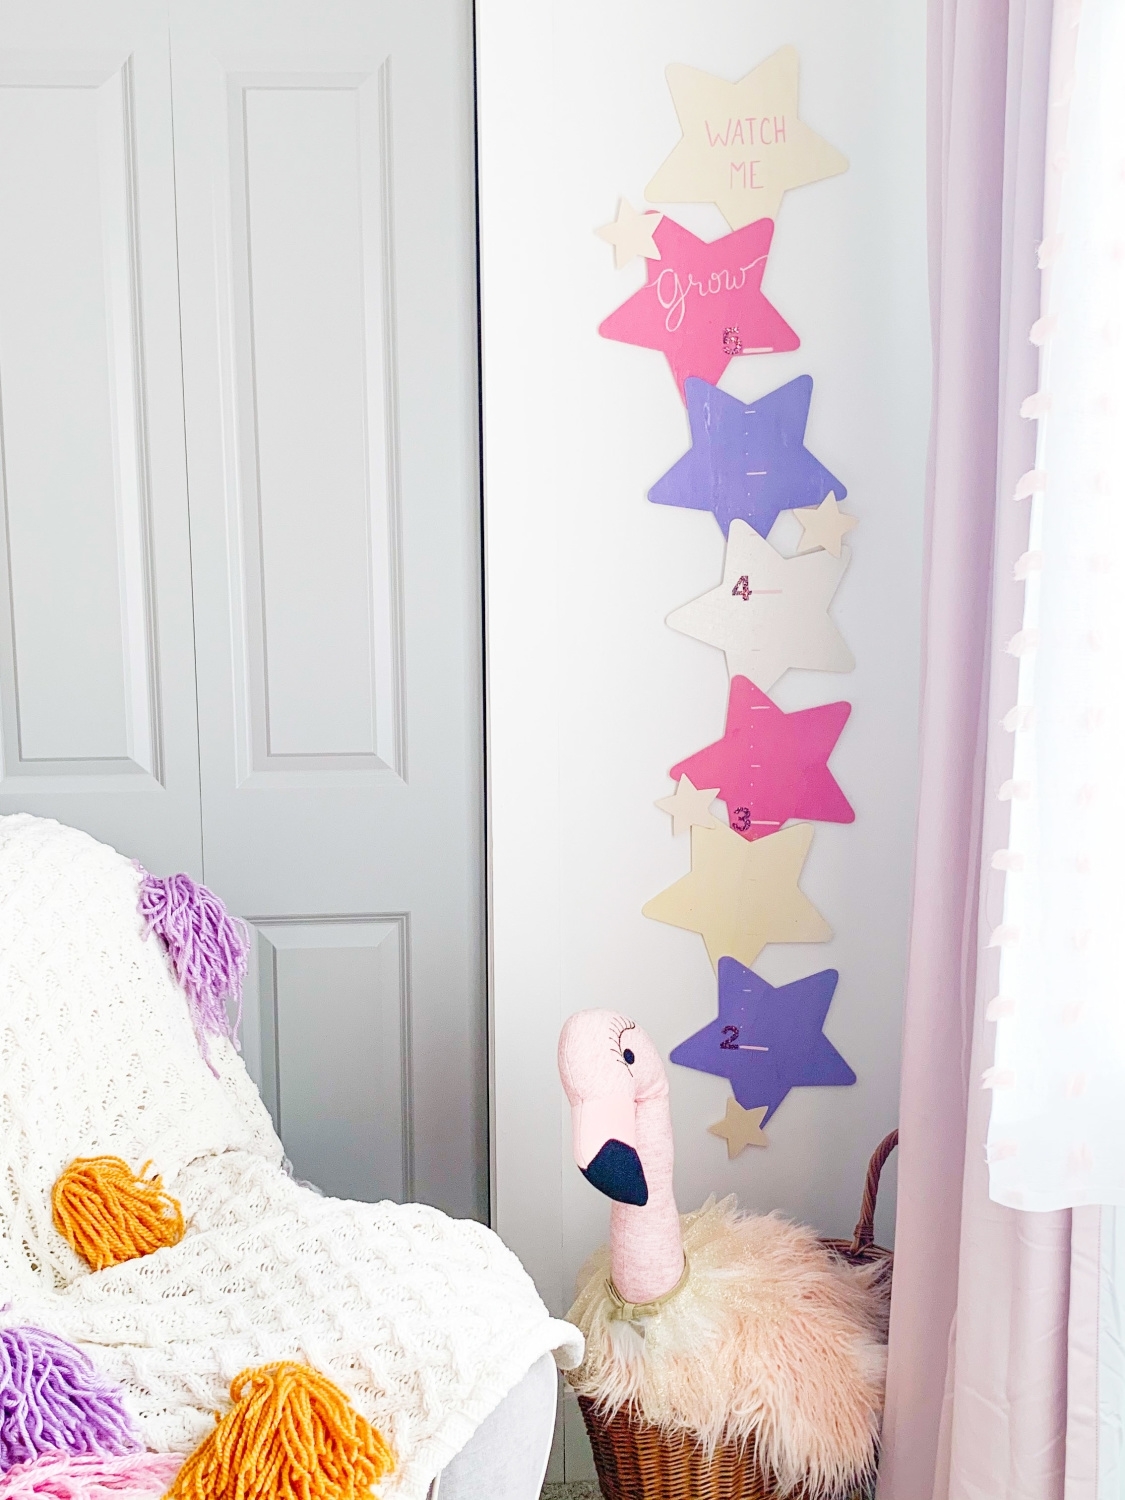 Hang up your wooden growth chart